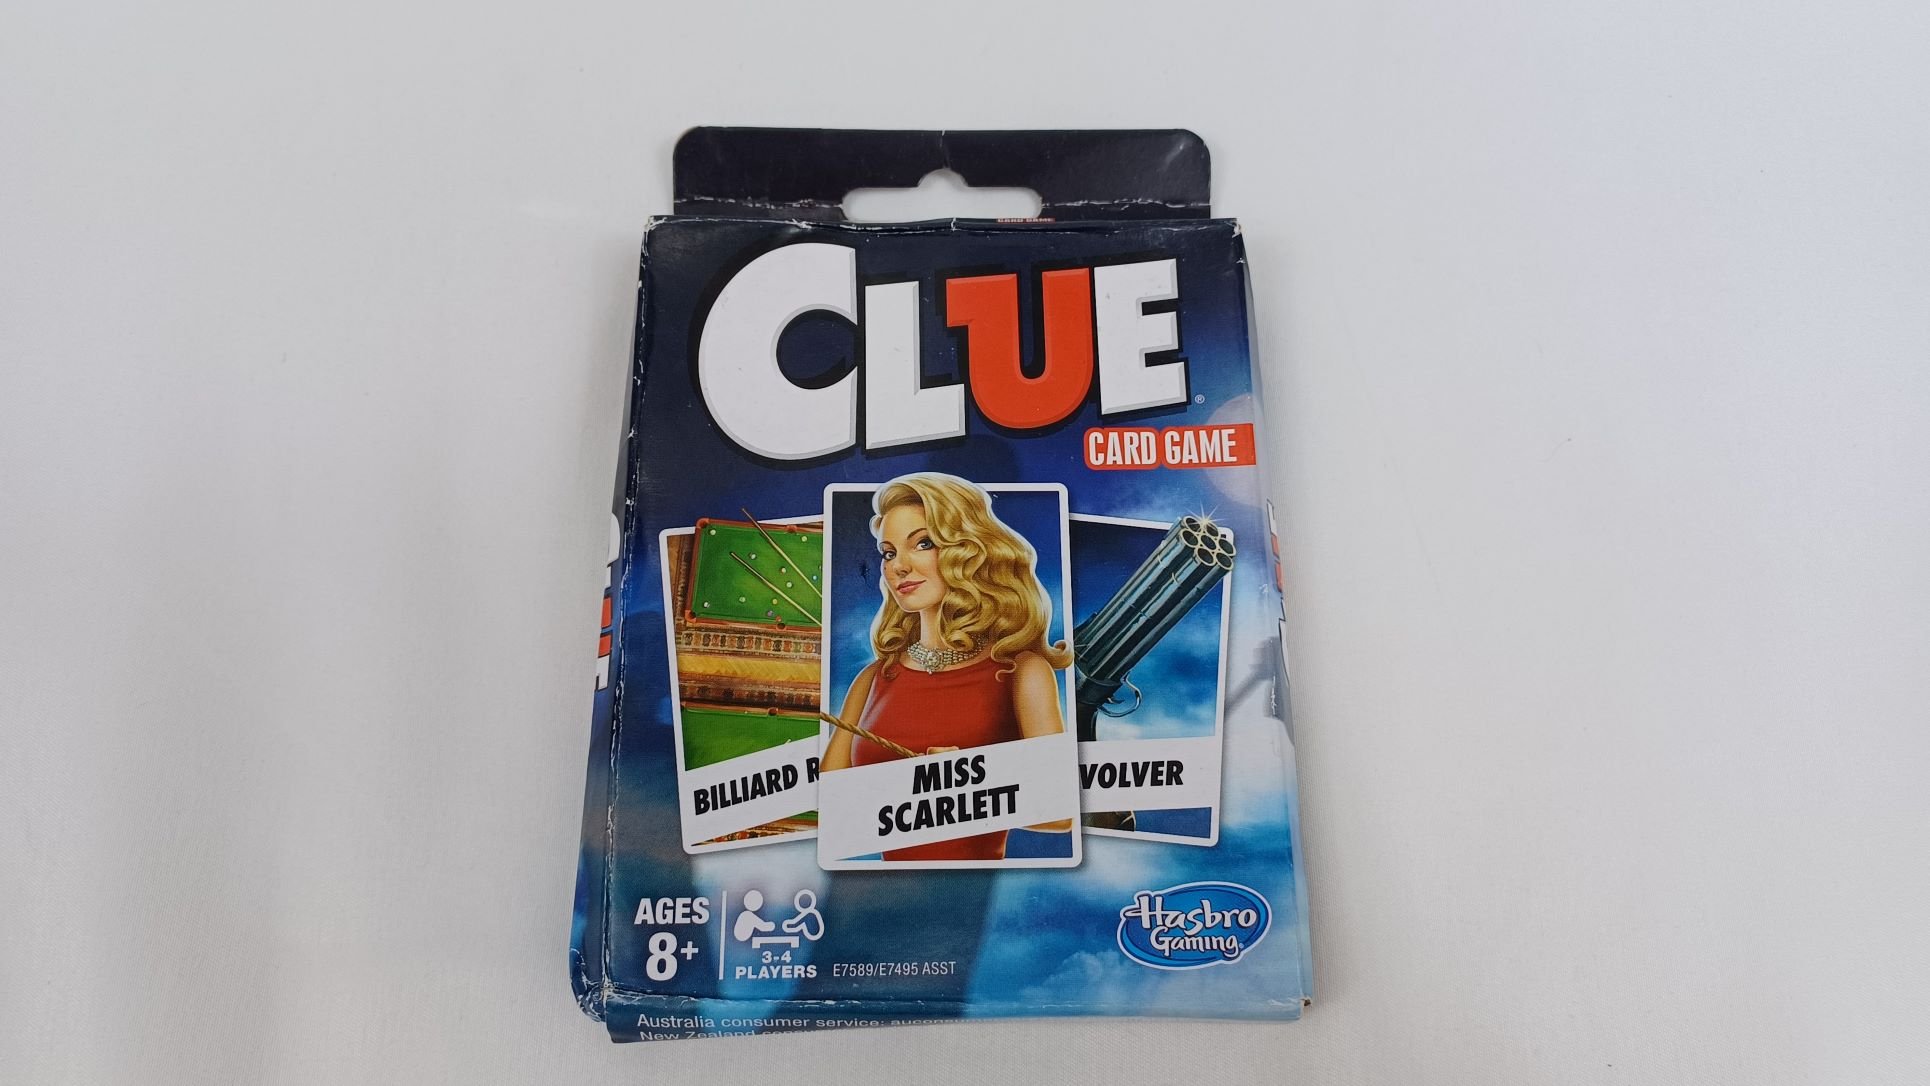 How to Play Clue Card Game (2018) (Rules and Instructions) - Geeky Hobbies